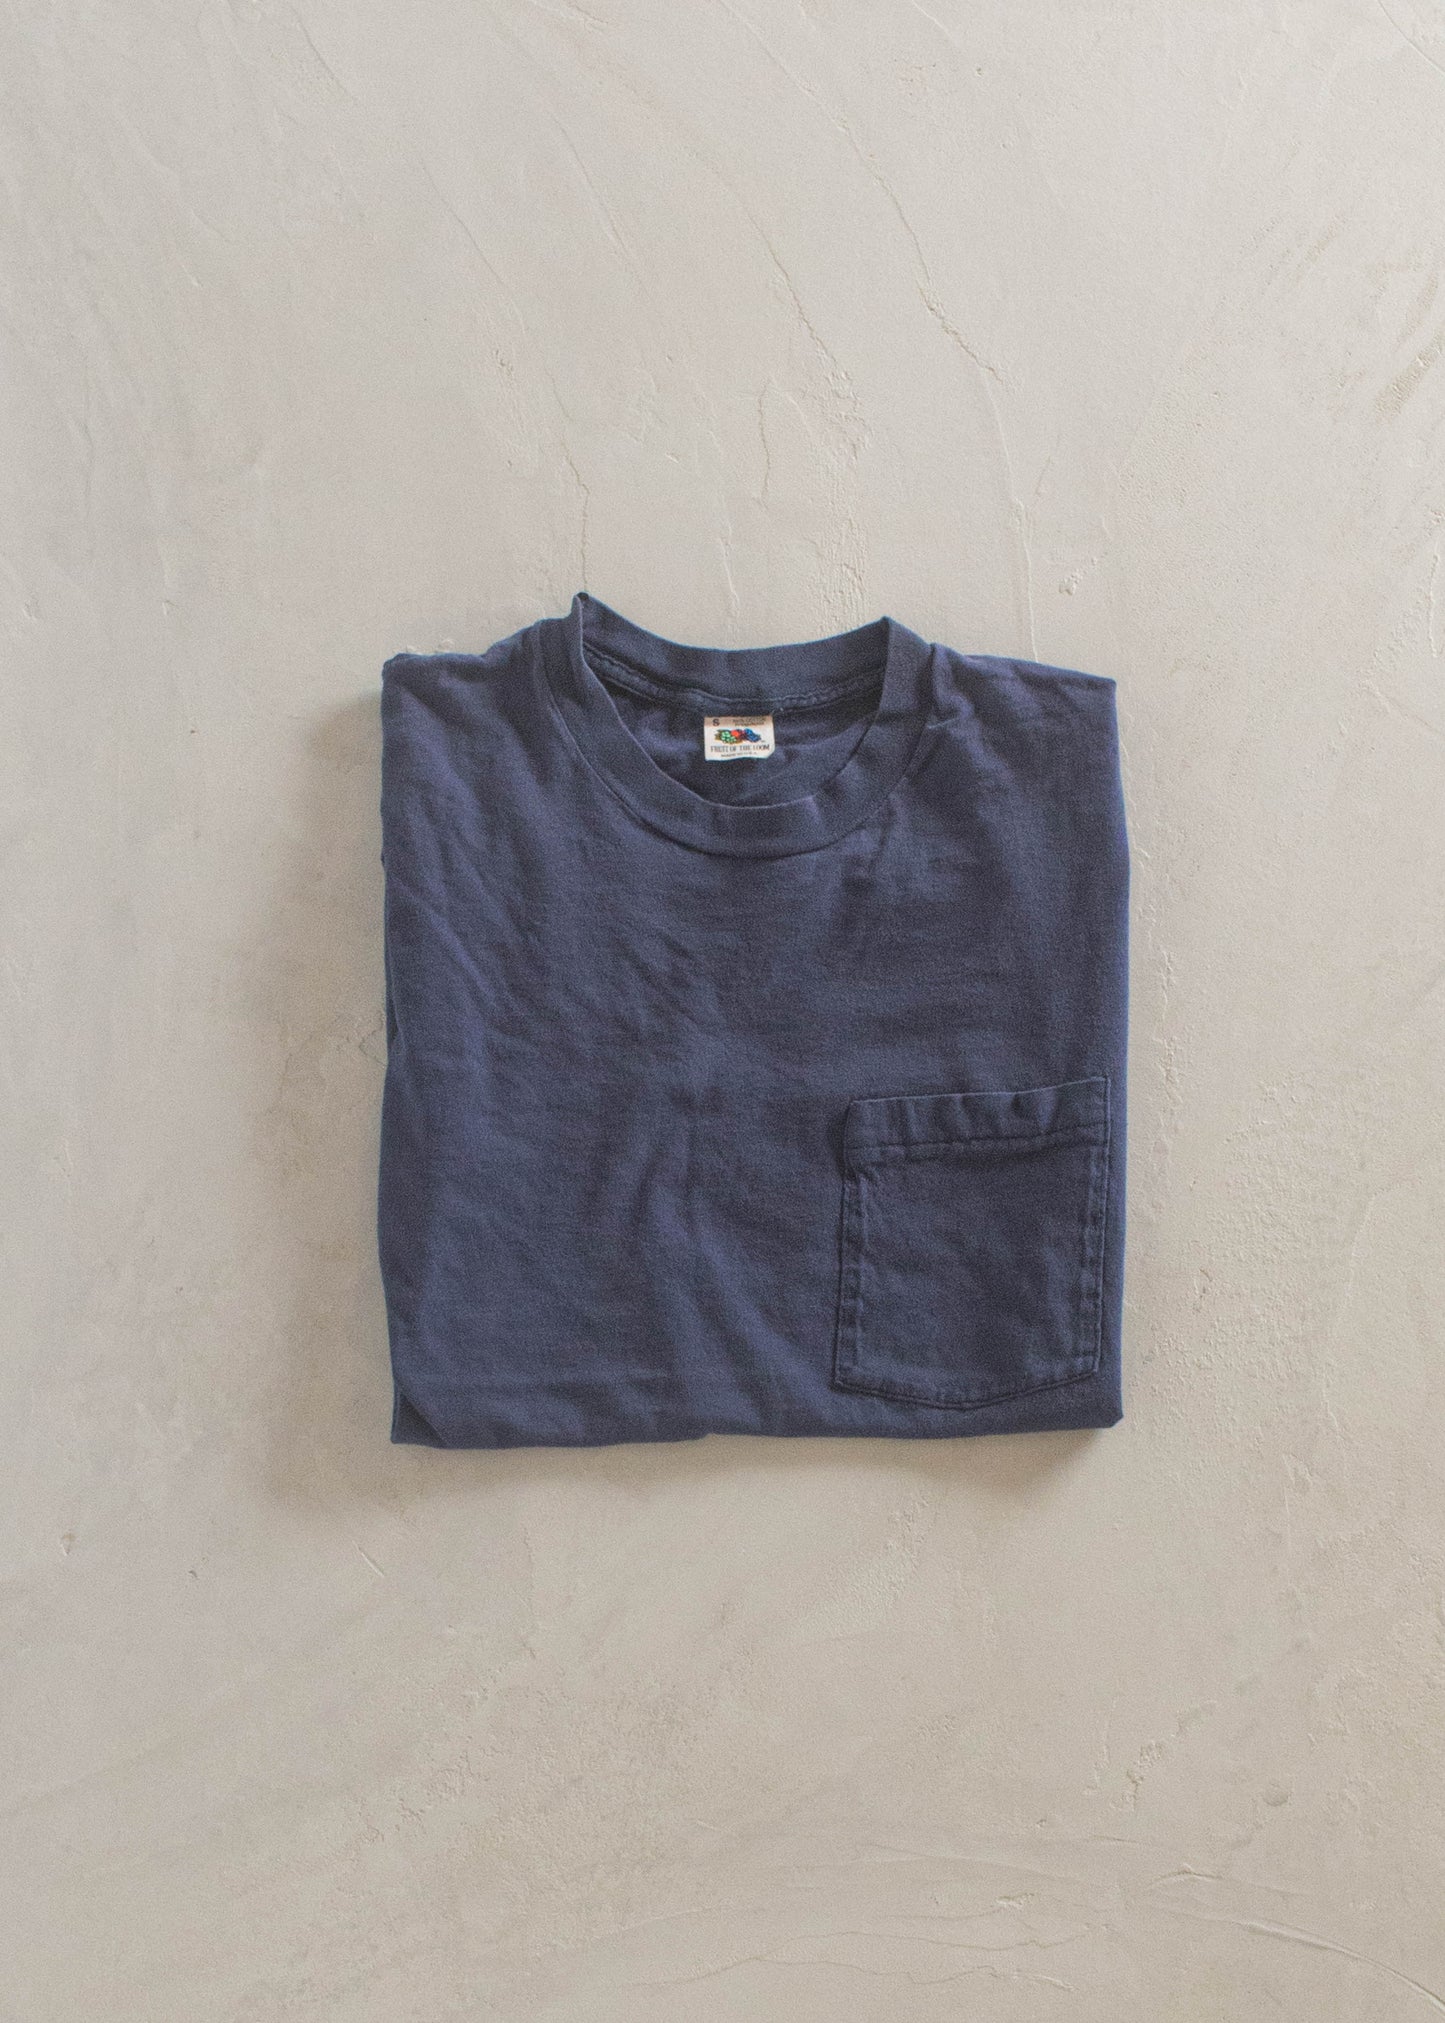 1980s Fruit of the Loom Selvedge Pocket T-Shirt Size XS/S